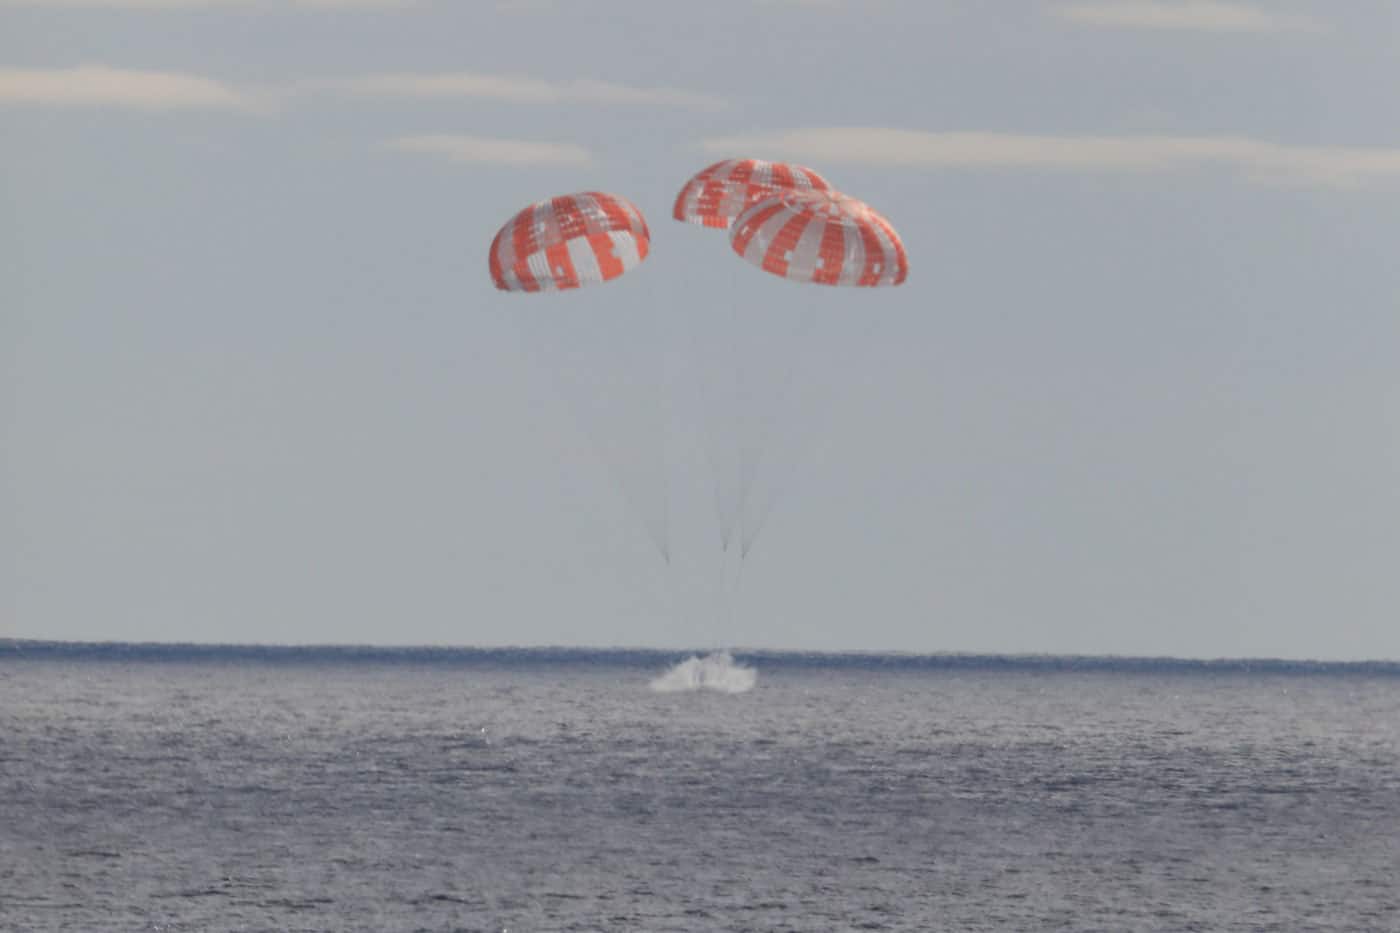 NASA’s Orion spacecraft for the Artemis I mission splashed down in the Pacific Ocean, after a 25.5 day mission to the Moon.